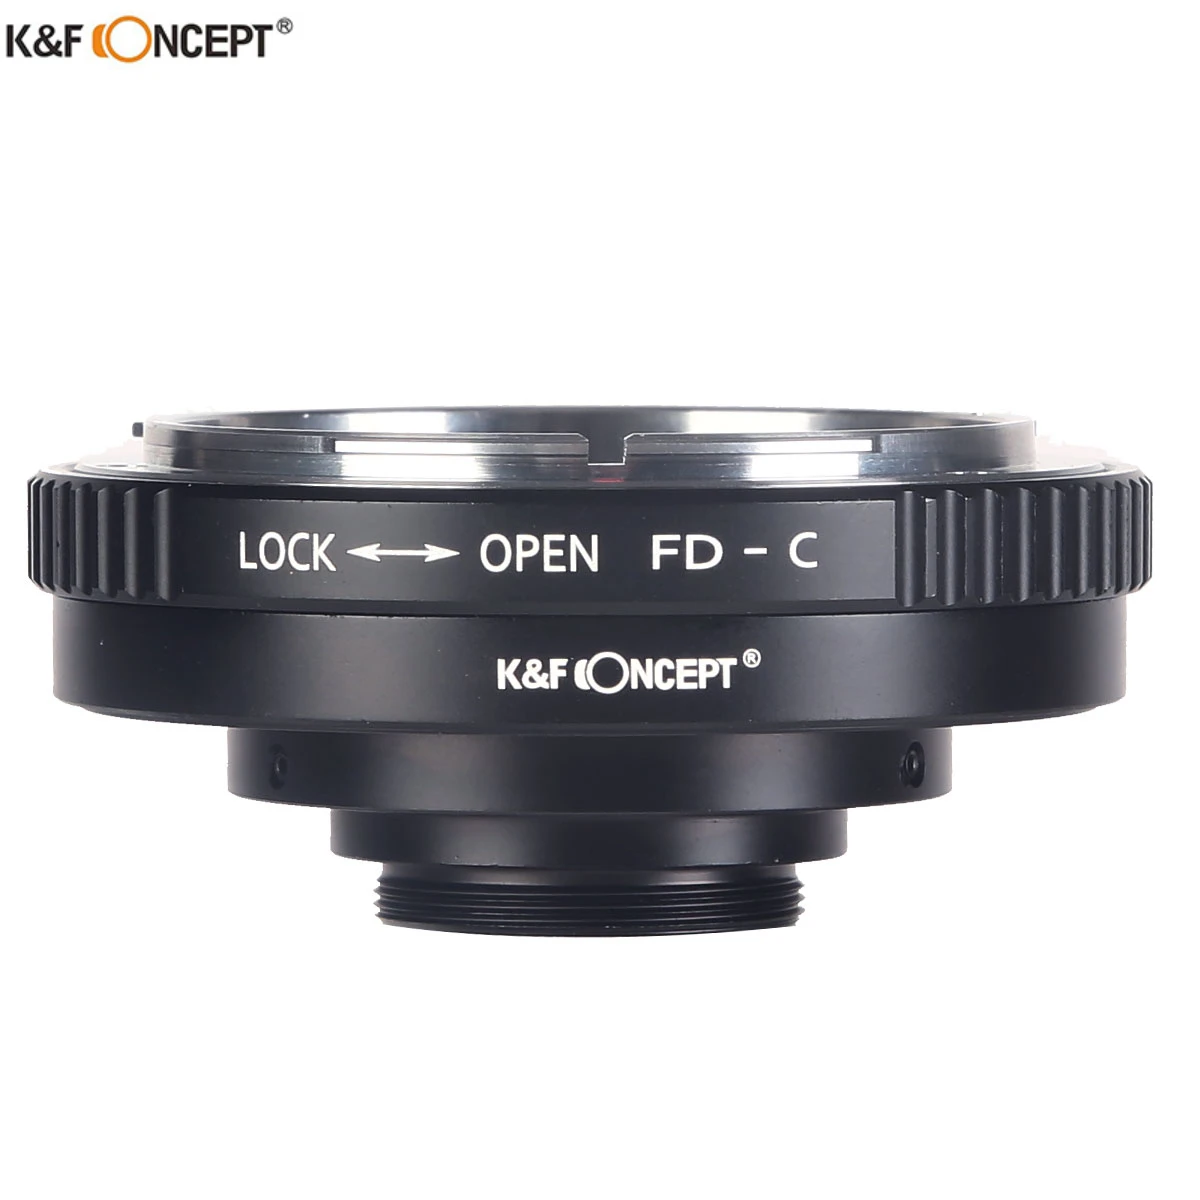 

K&F Concept Lens Adapter Ring For Canon FD FL Mount Lenses to C Mount Camera Body